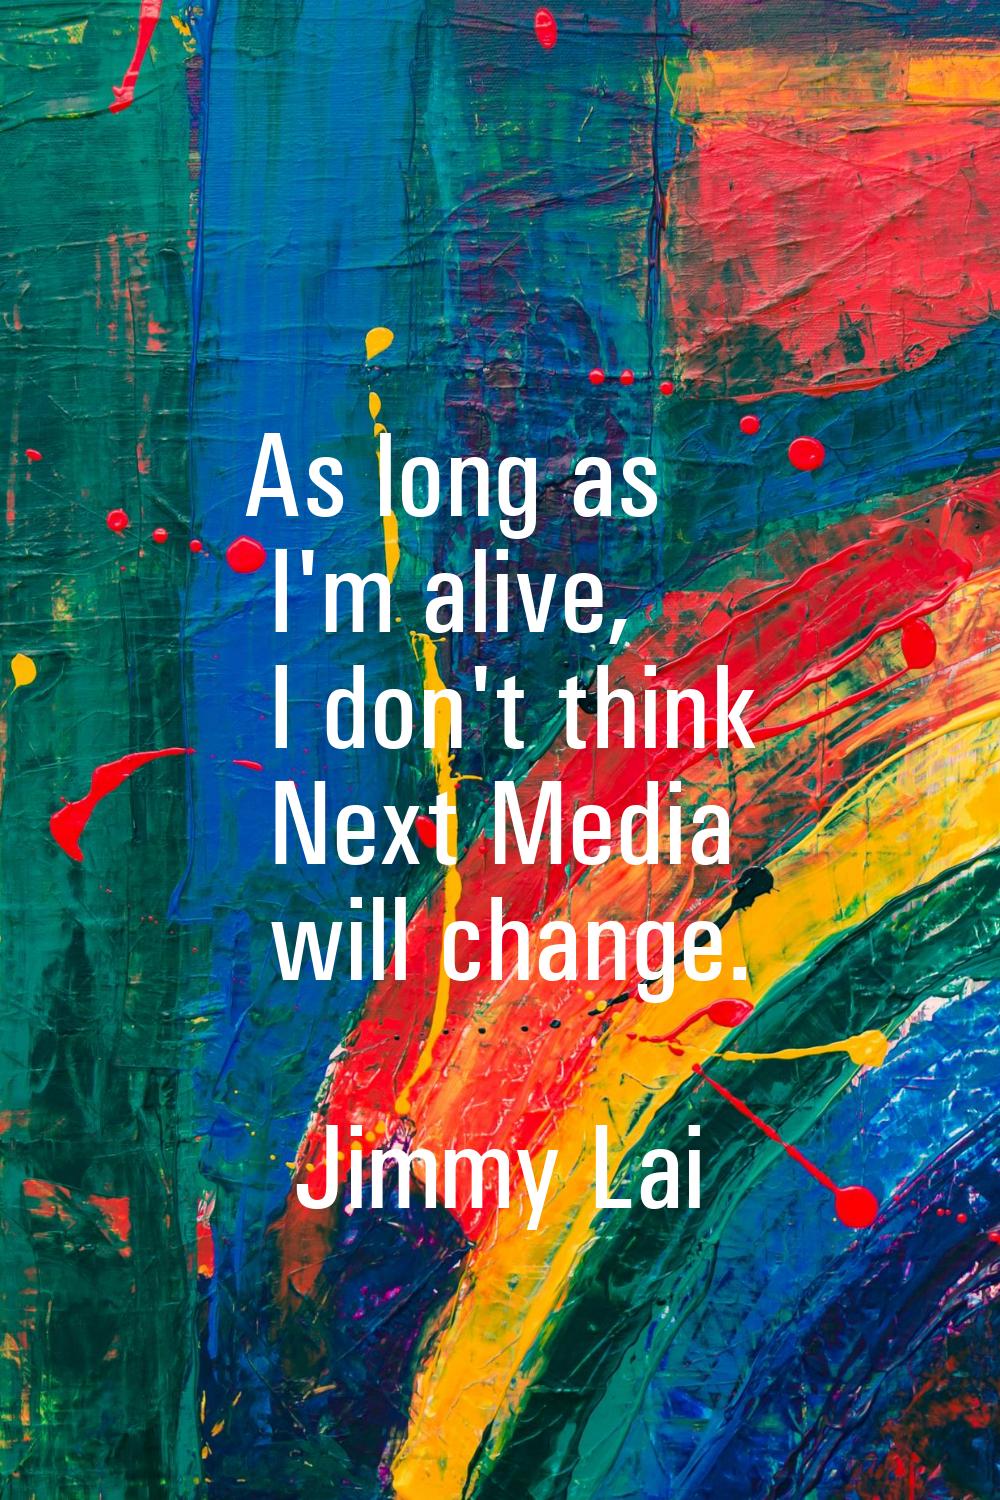 As long as I'm alive, I don't think Next Media will change.